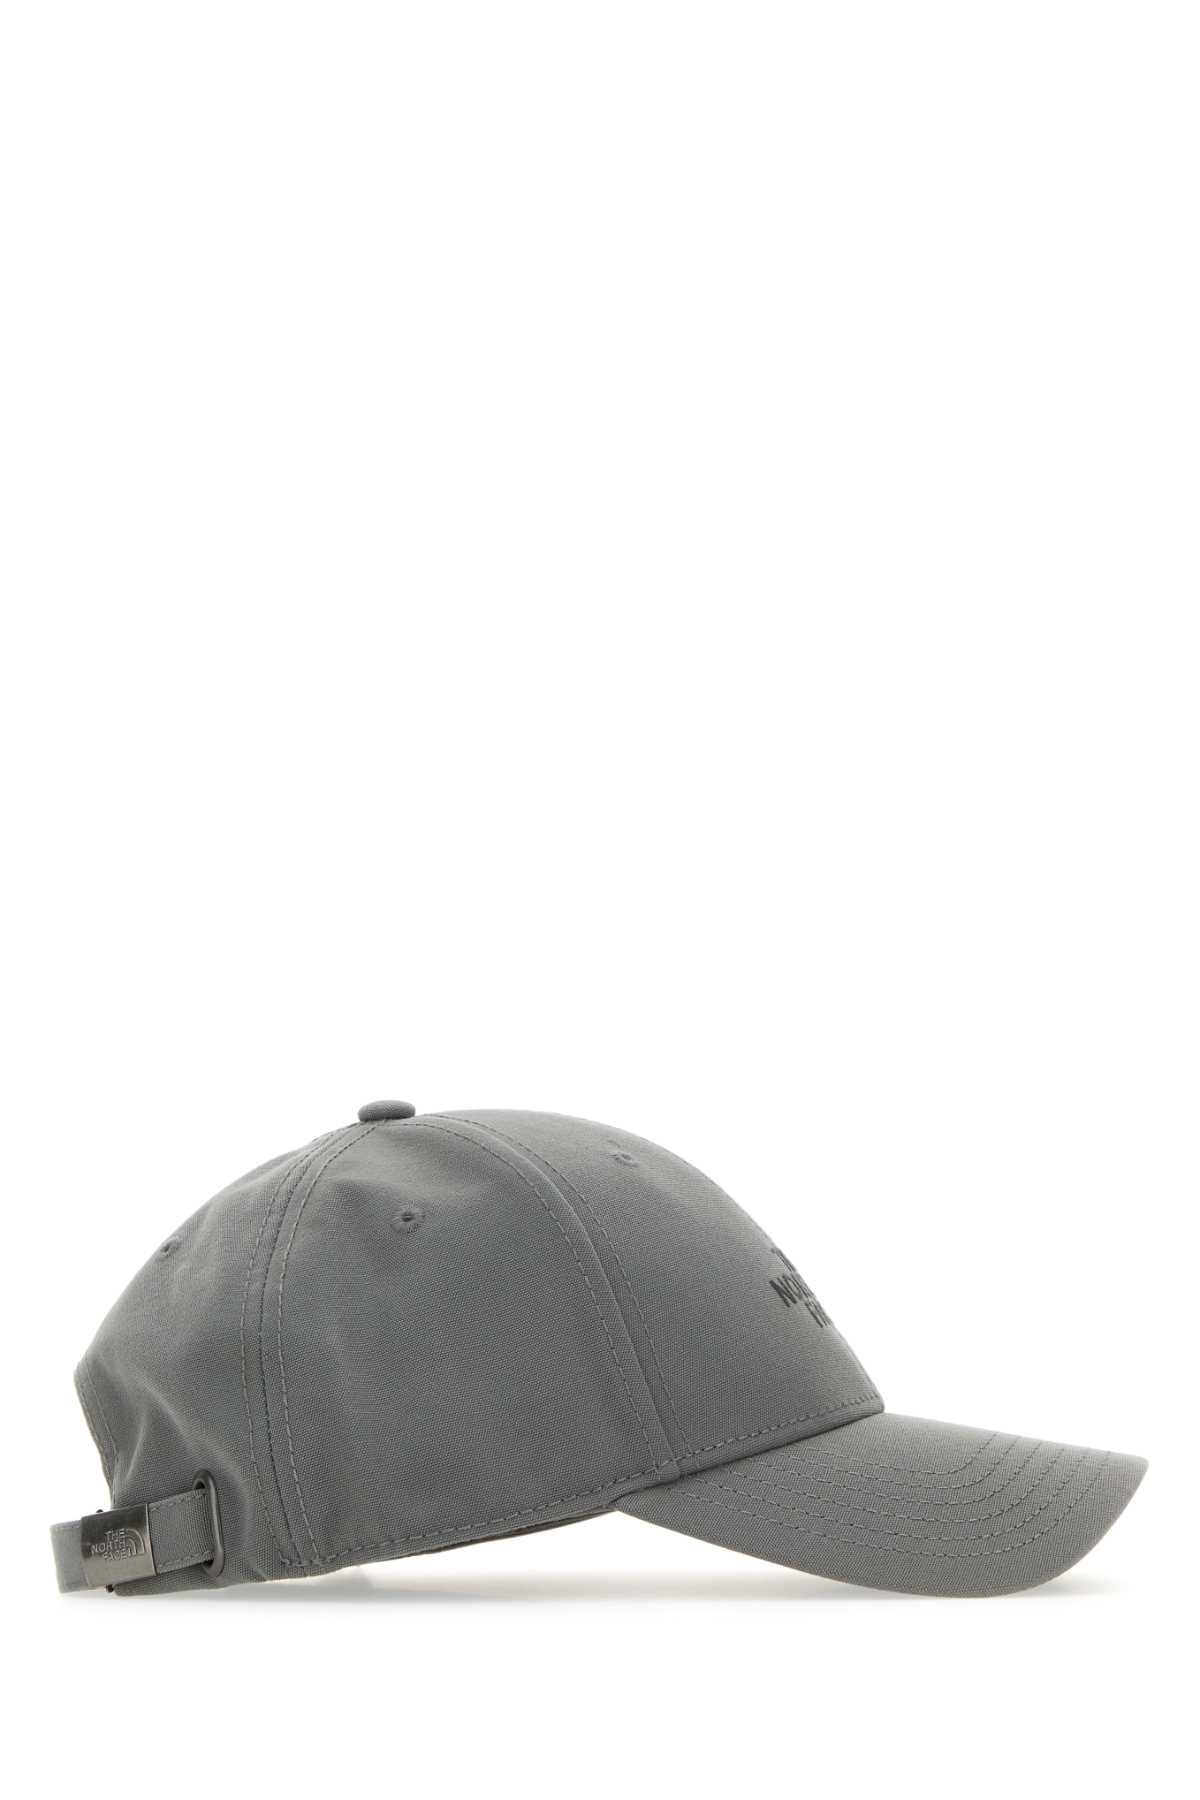 The North Face Grey Polyester Baseball Cap In Smokedpearlasphaltgrey